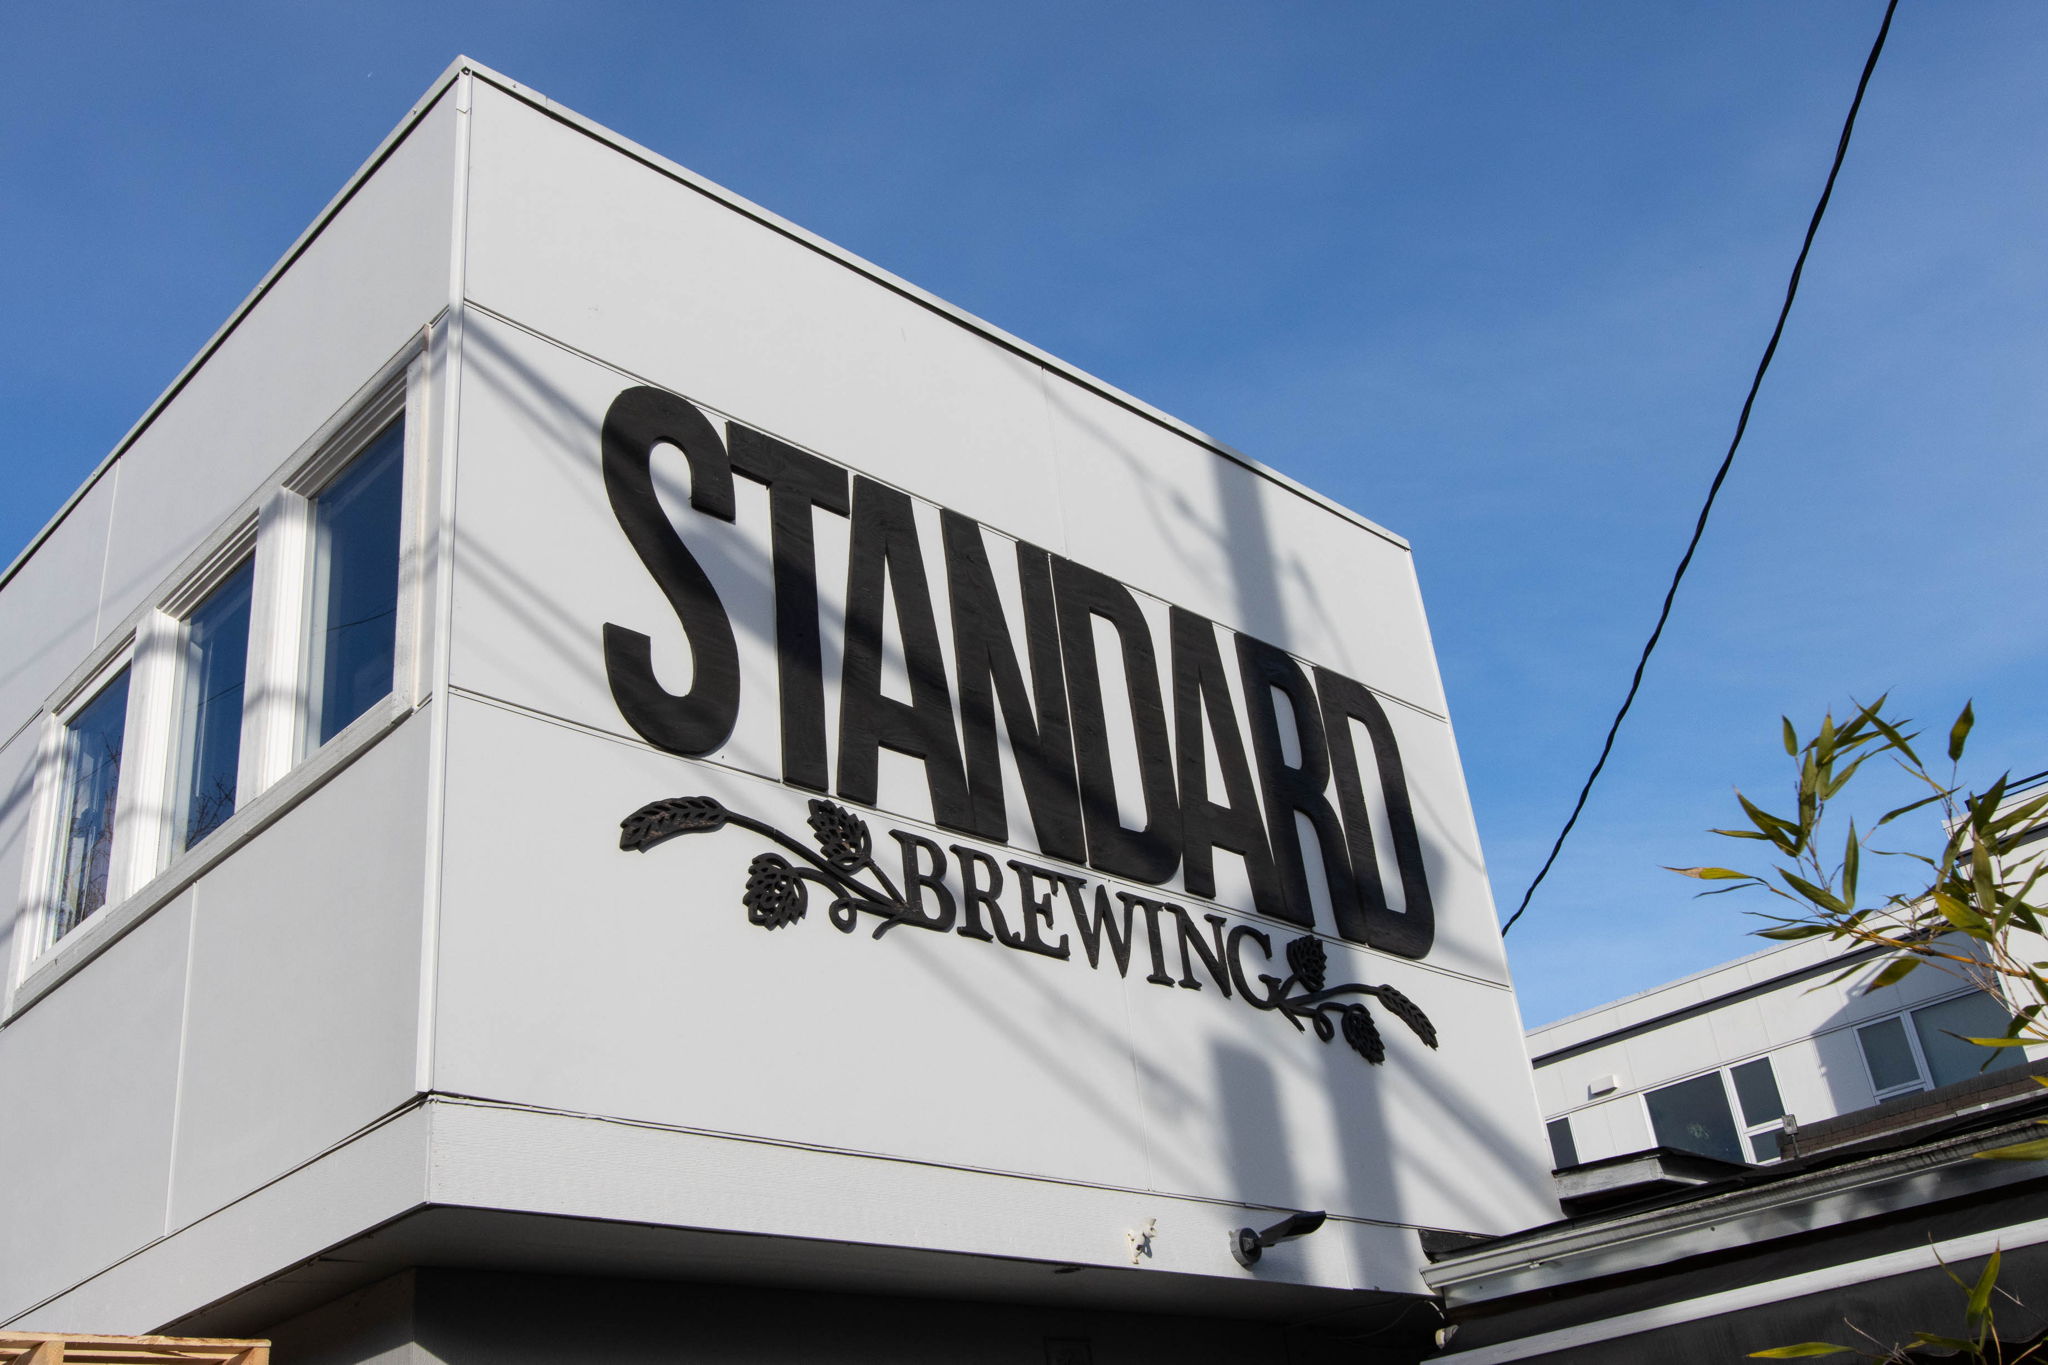 STANDARD BREWING (Beer, Cocktails, and food.)